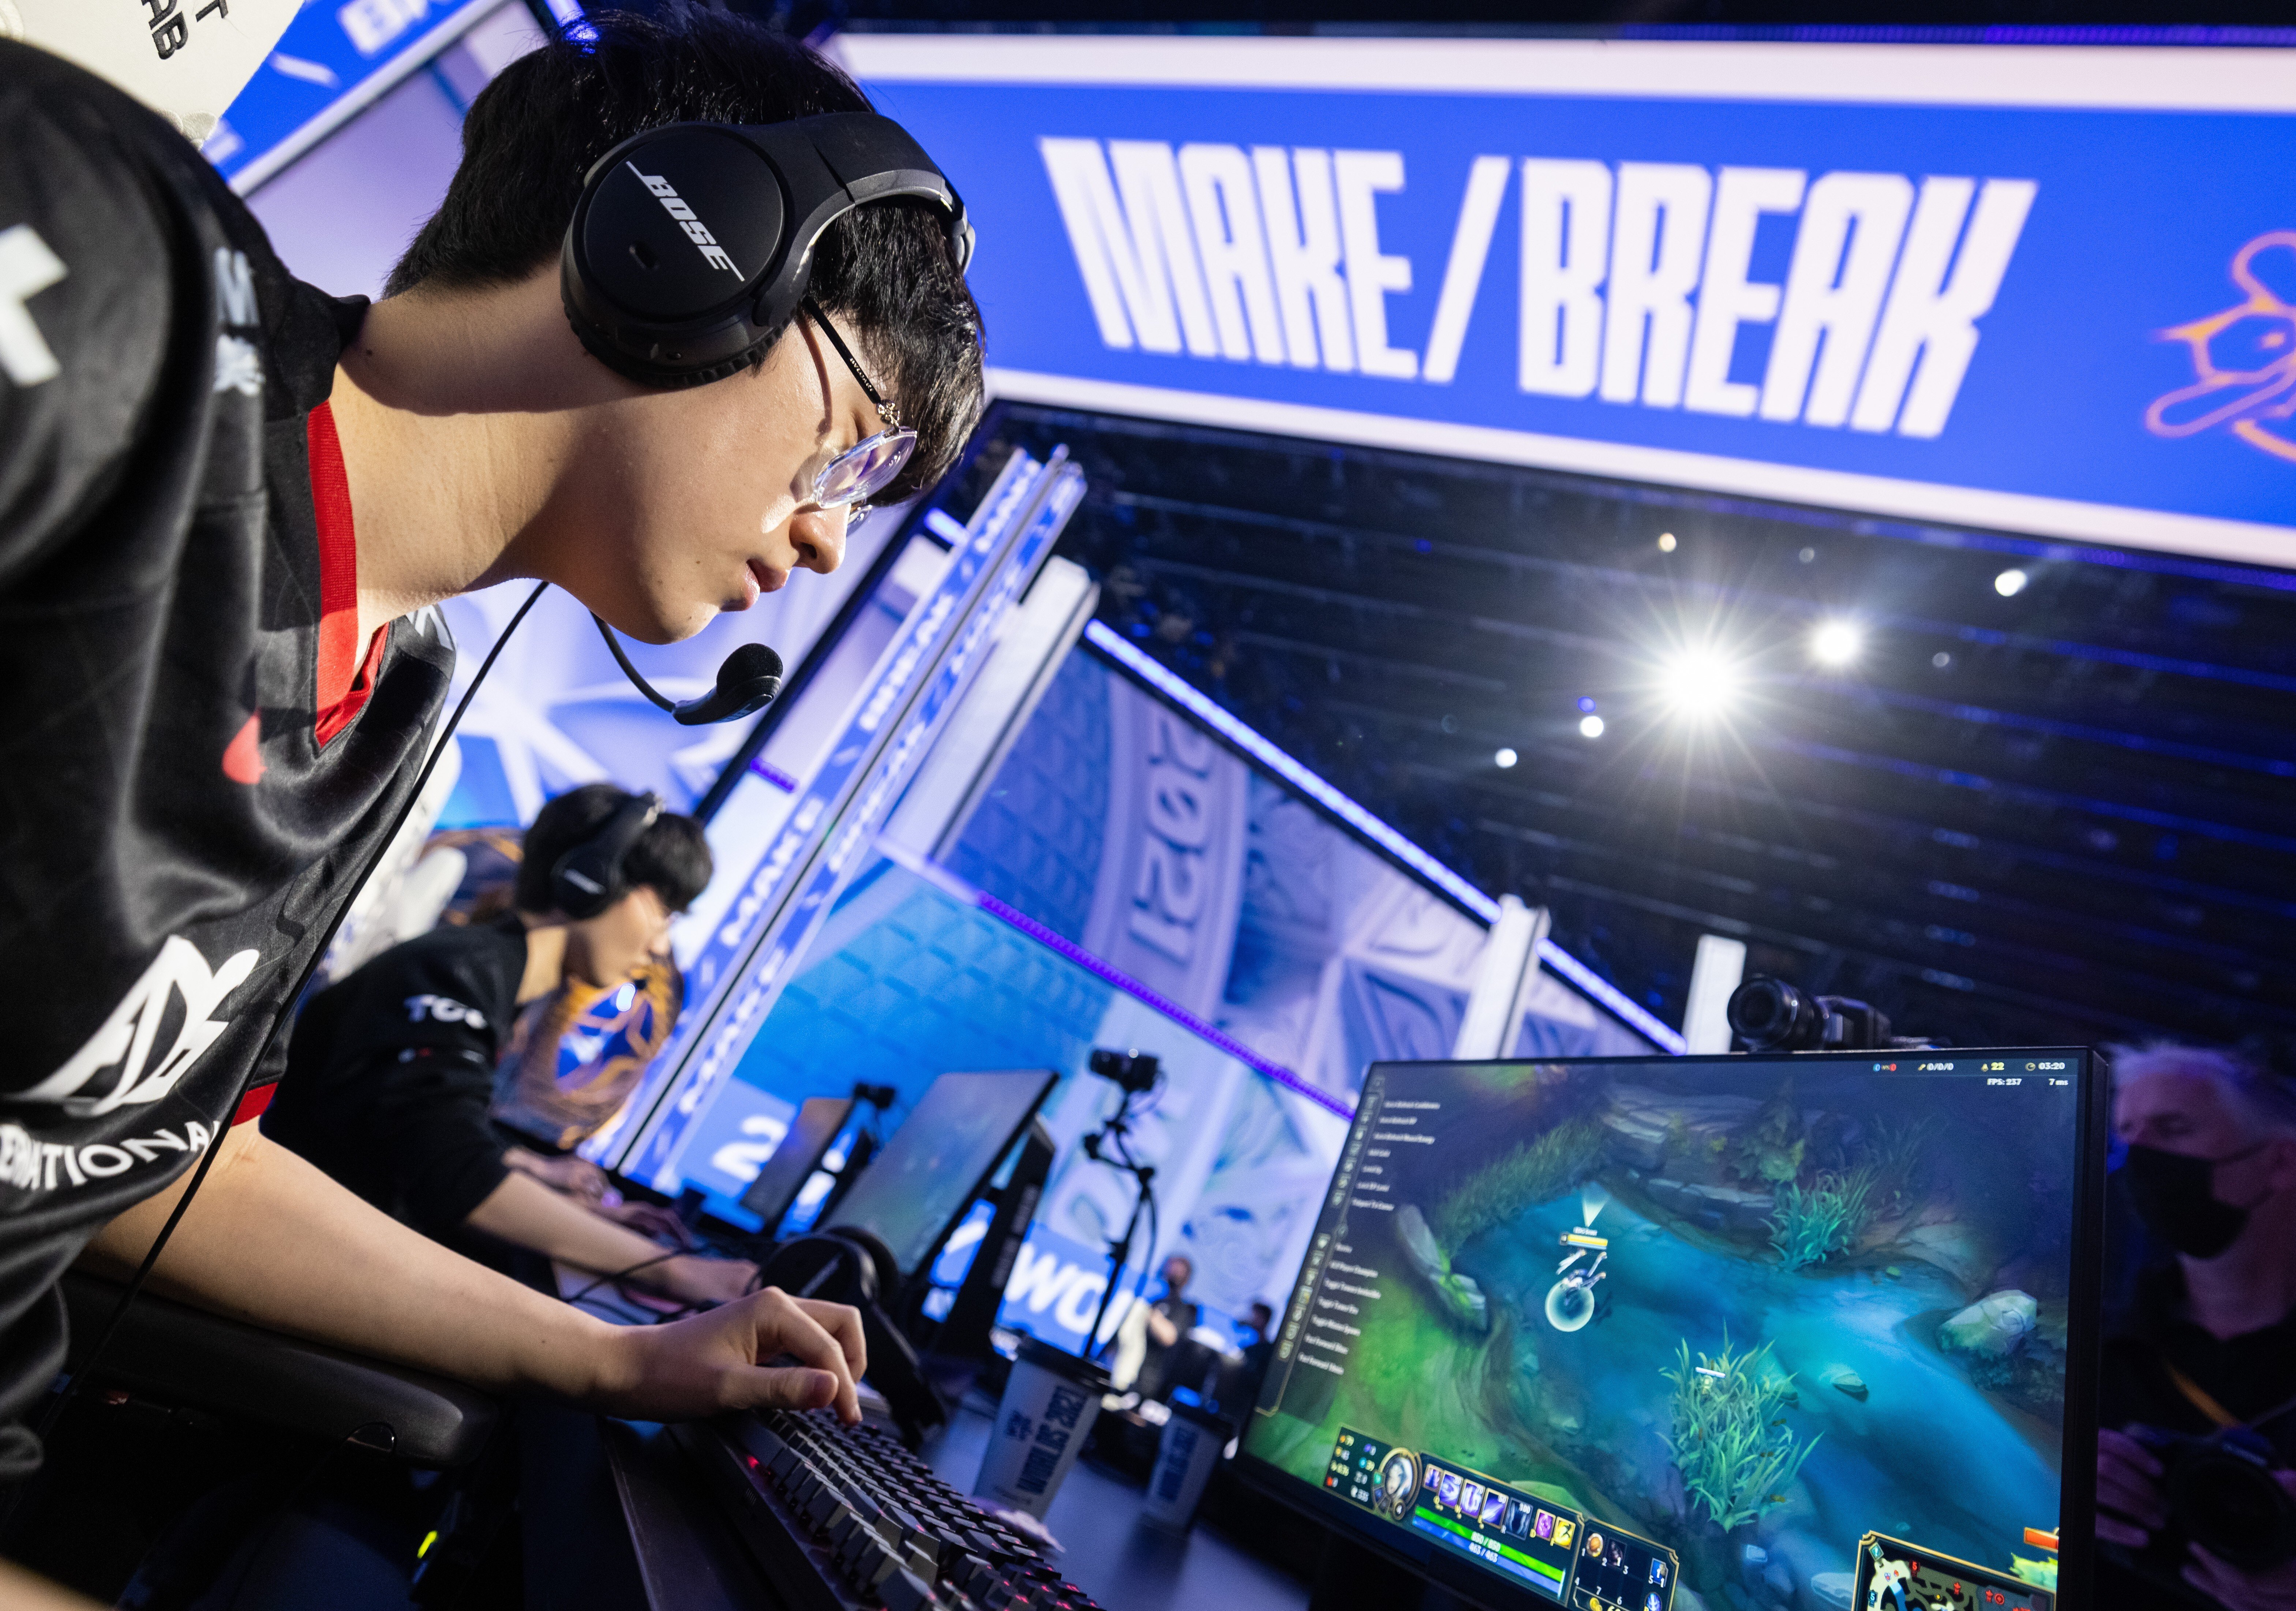 Edward Gaming's Lee “Scout” Ye-chan is shown preparing to make his move as the Chinese esports team’s mid lane player at the League of Legends World Championship finals on November 6, 2021, held in Reykjavik, capital of Iceland. Photo: Riot Games via Getty Images